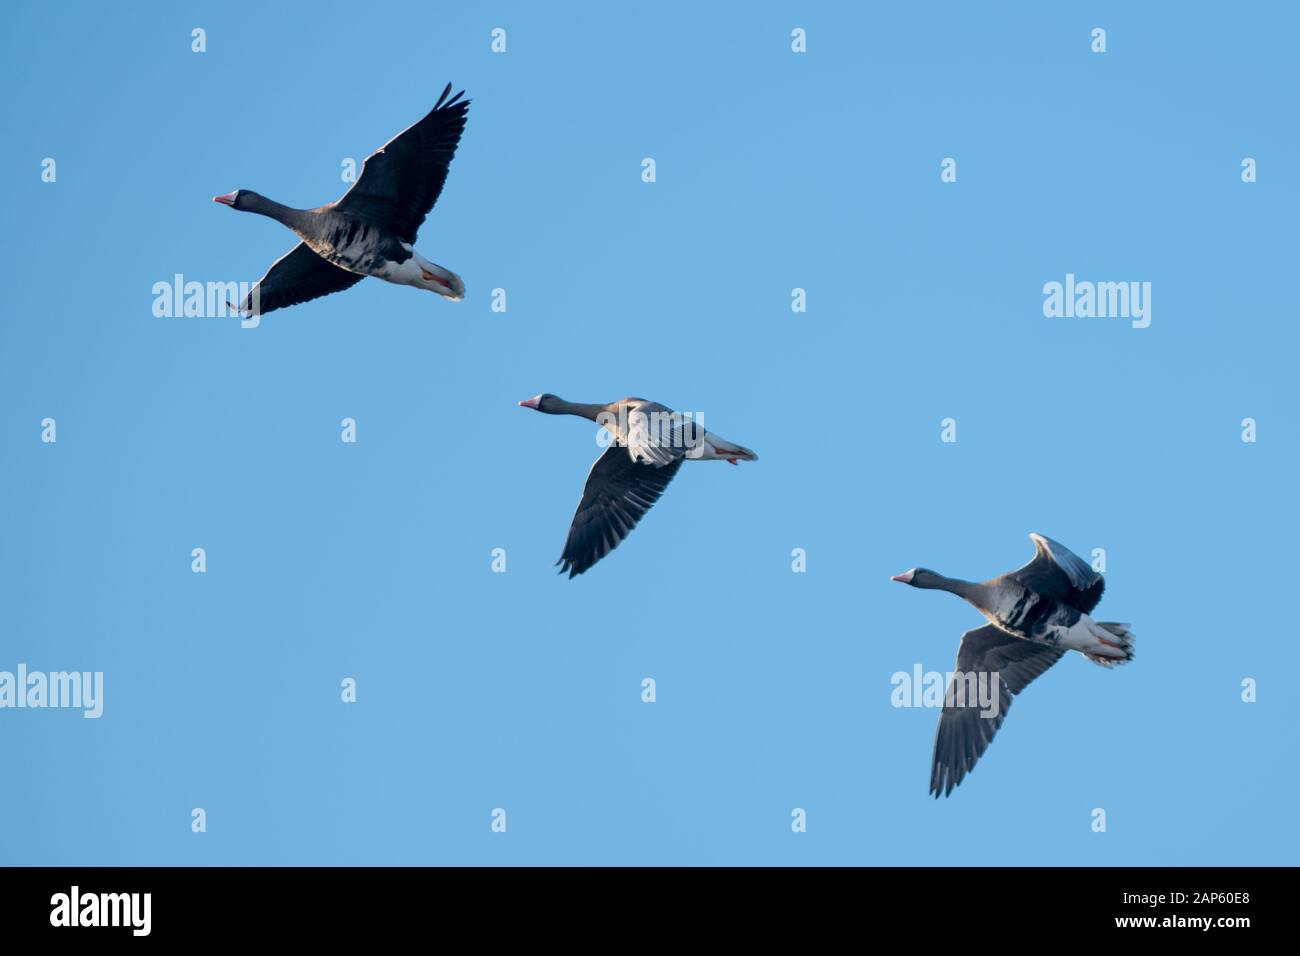 A flock of migrating greylag geese flying in formation. In silhouette against blue clear sky. Italy Stock Photo